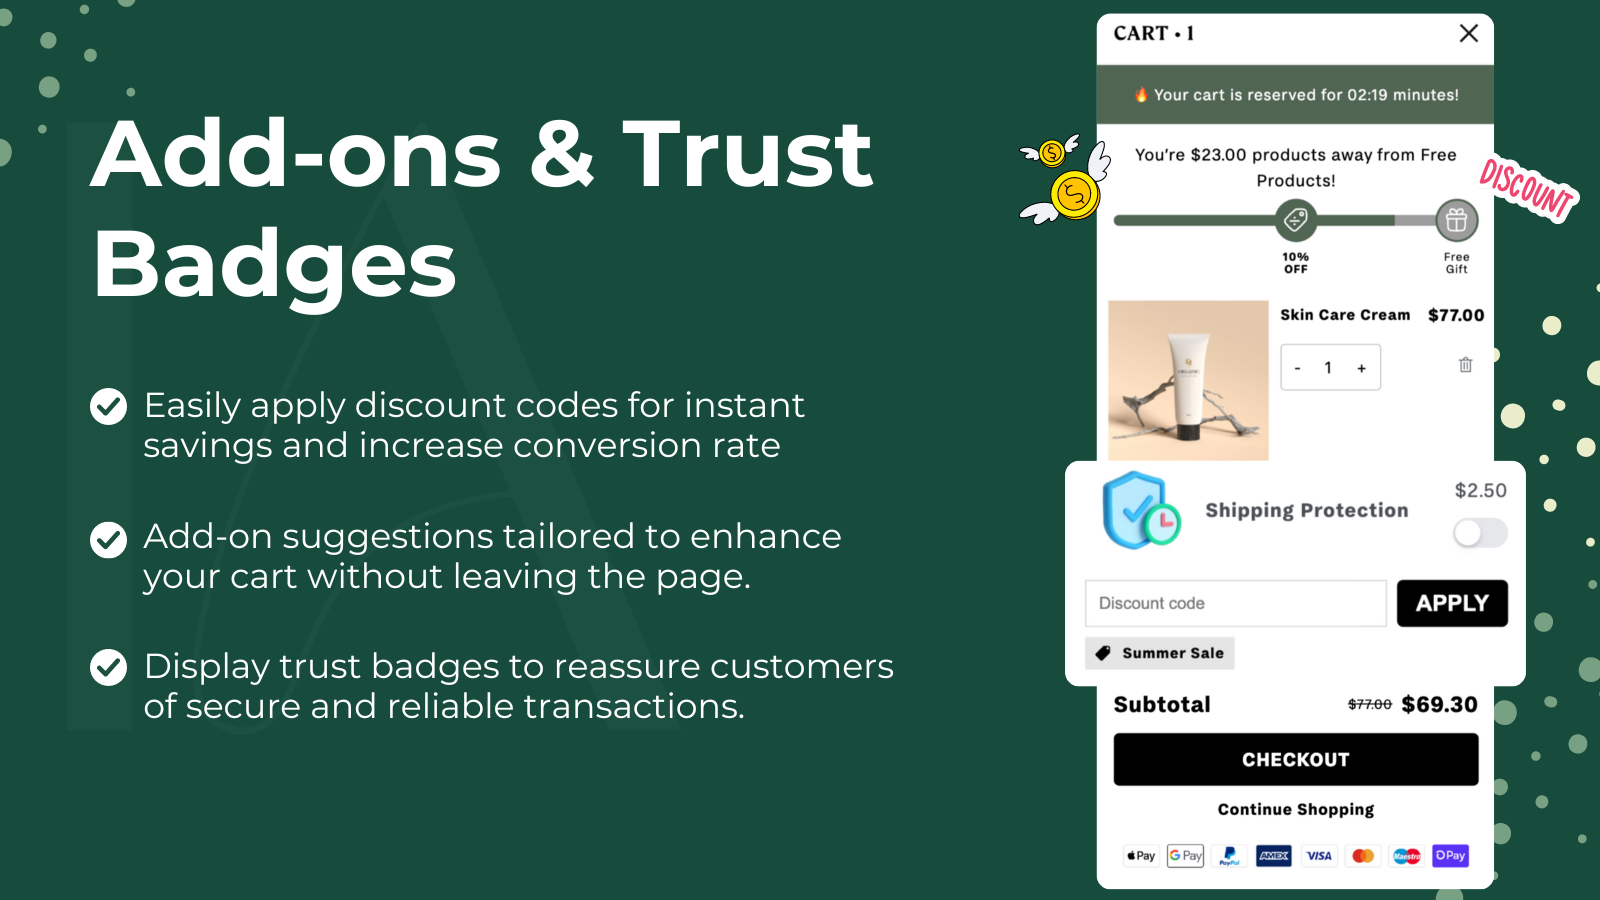 Add-ons, Trust Badge and Discount Code Functions in the cart. 